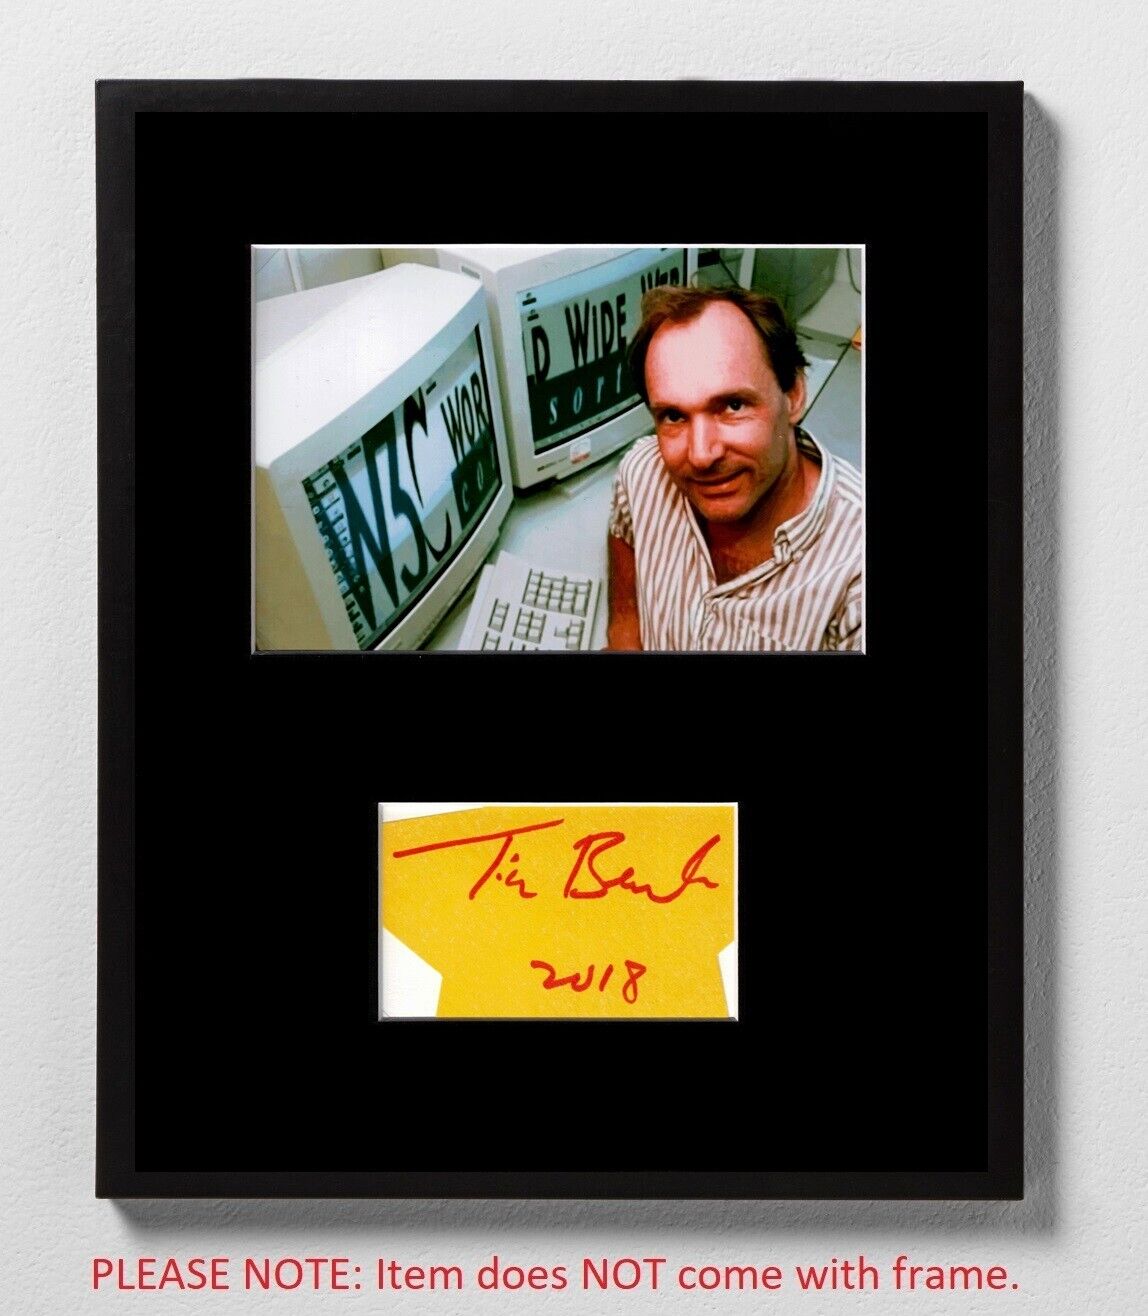 Tim Berners-Lee HAND SIGNED Matted Cut & Photo World Wide Web Internet Autograph